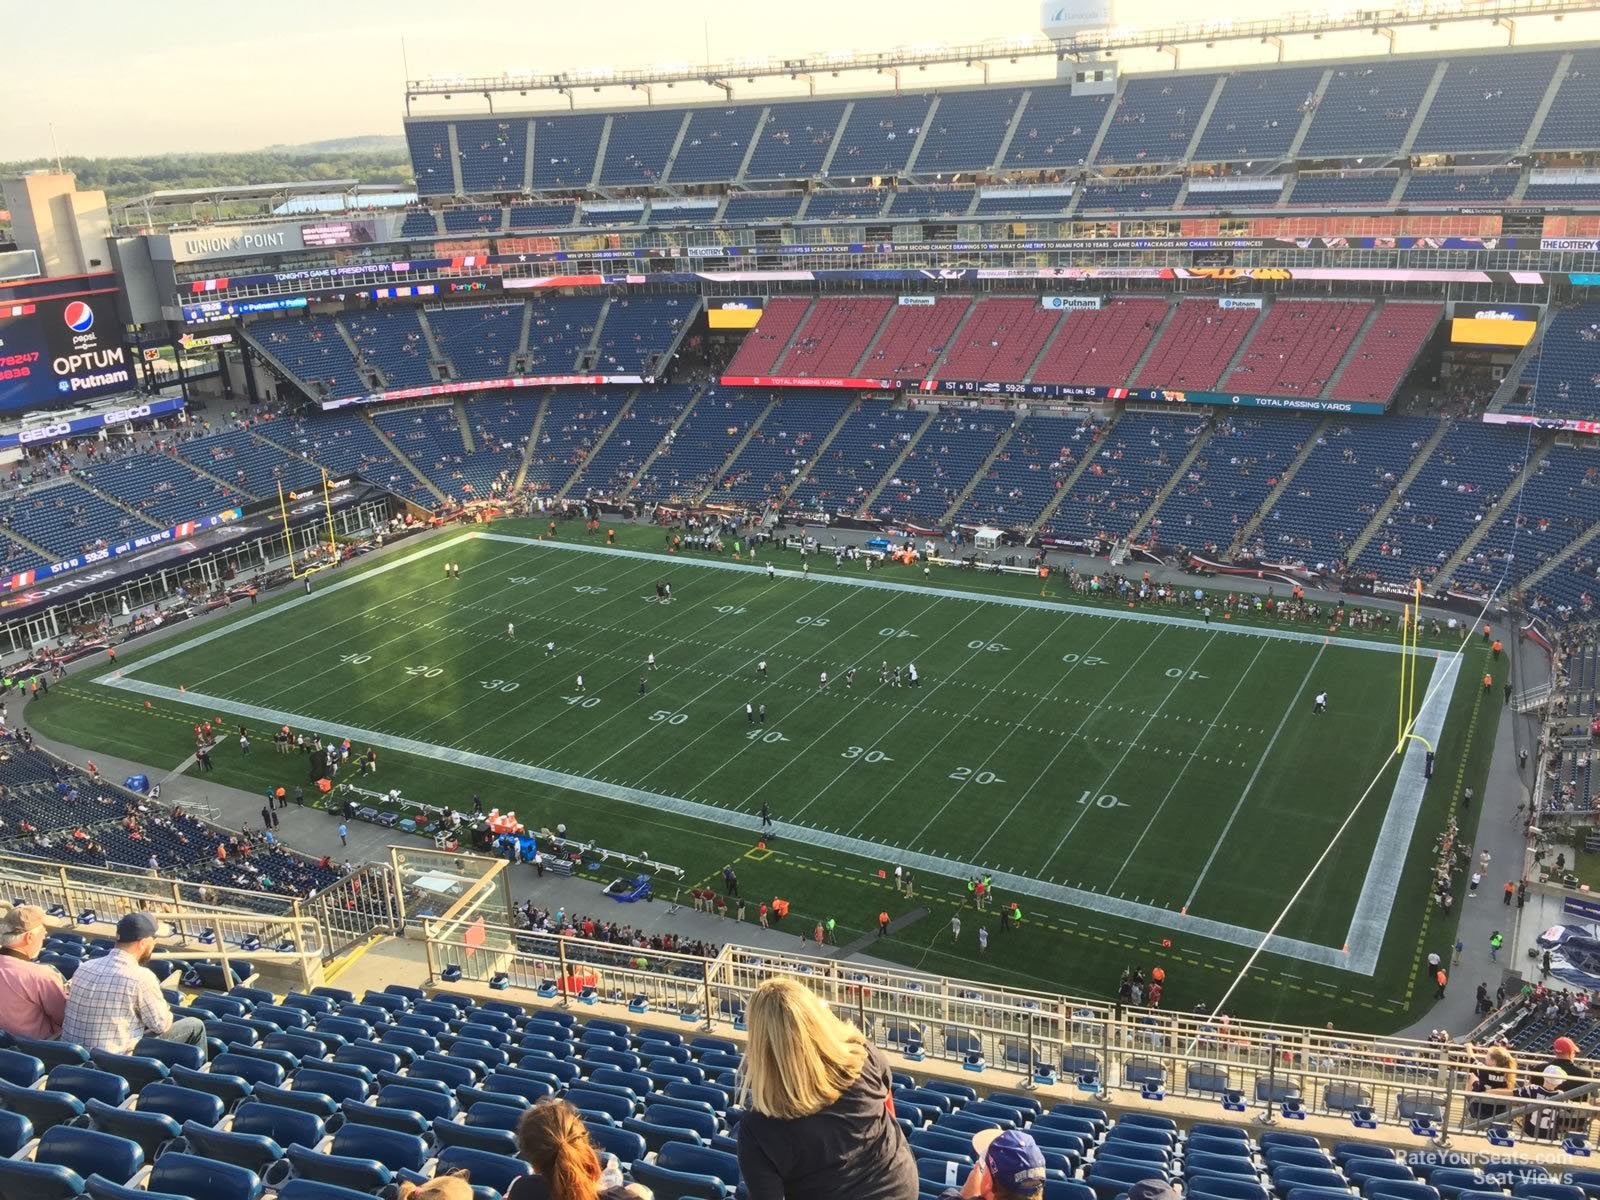 Section 305 at Gillette Stadium